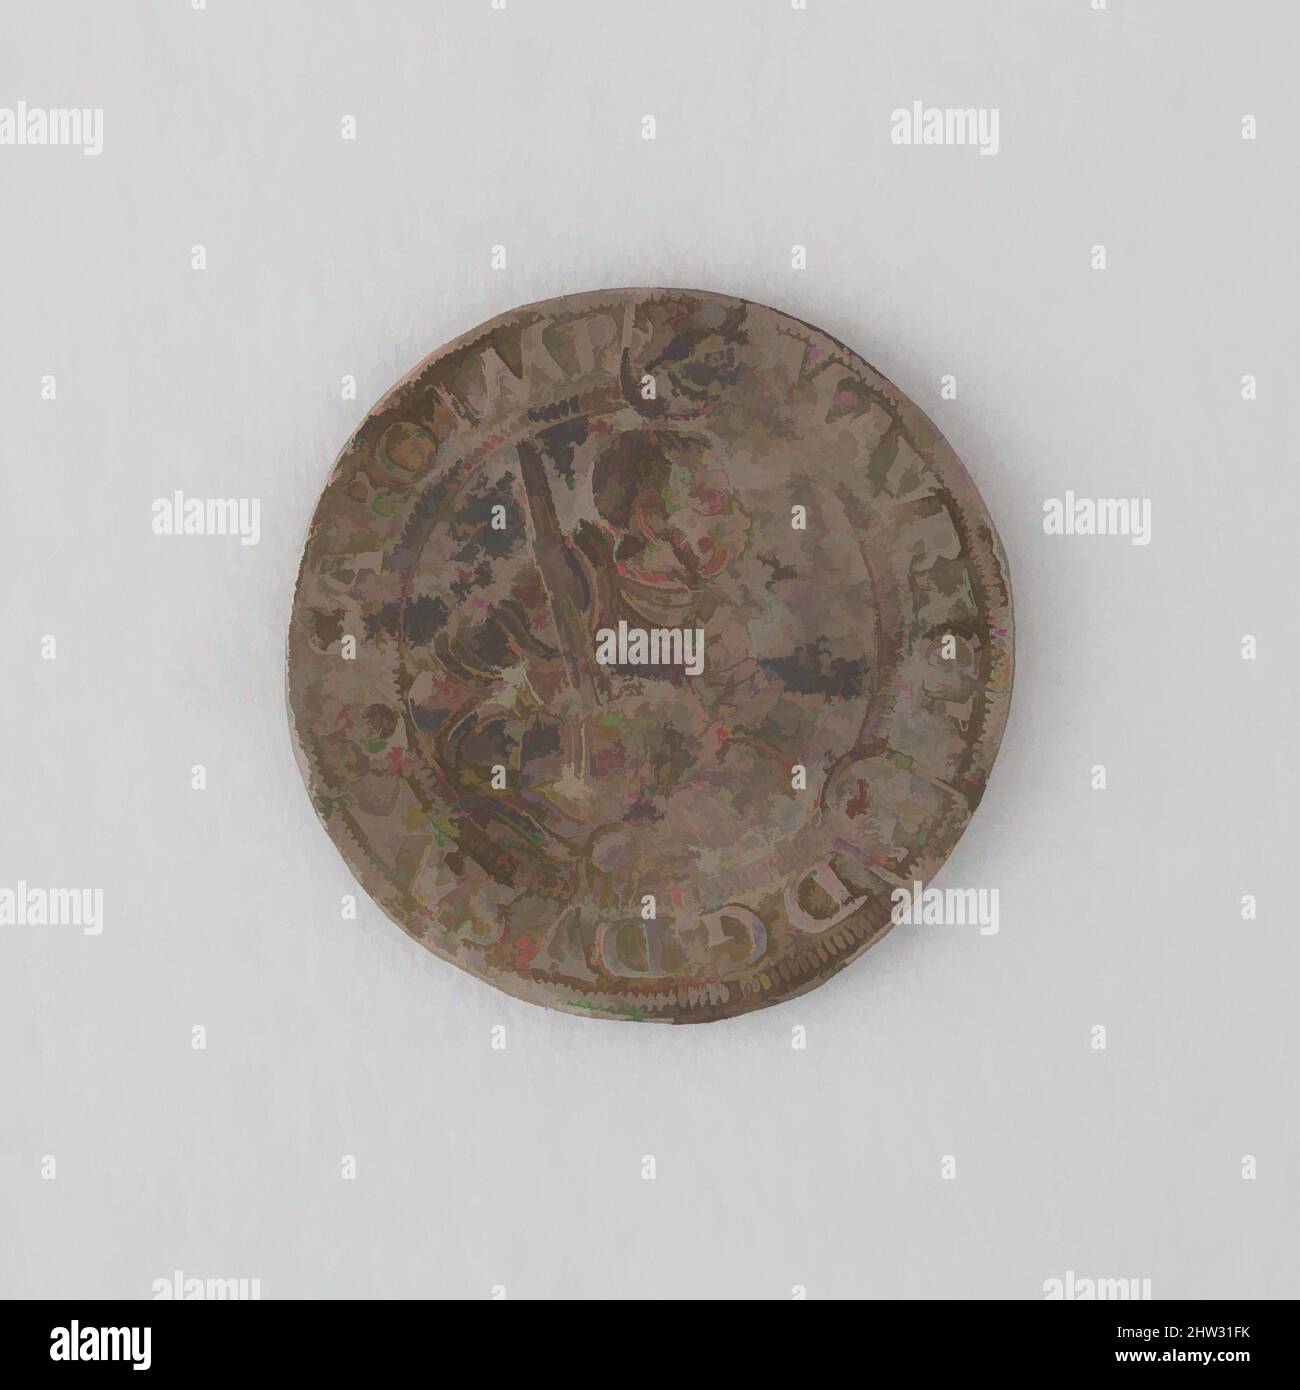 Art inspired by Coin (Thaler, Annaberg) Showing Maurice, Duke and Elector of Saxony, 1552, German, Silver, Diam. 1 5/8 in. (4.1 cm); thickness 1/8 in. (0.3 cm); Wt. 1 oz. (28.3 g), Miscellaneous-Coins and Medals, Classic works modernized by Artotop with a splash of modernity. Shapes, color and value, eye-catching visual impact on art. Emotions through freedom of artworks in a contemporary way. A timeless message pursuing a wildly creative new direction. Artists turning to the digital medium and creating the Artotop NFT Stock Photo